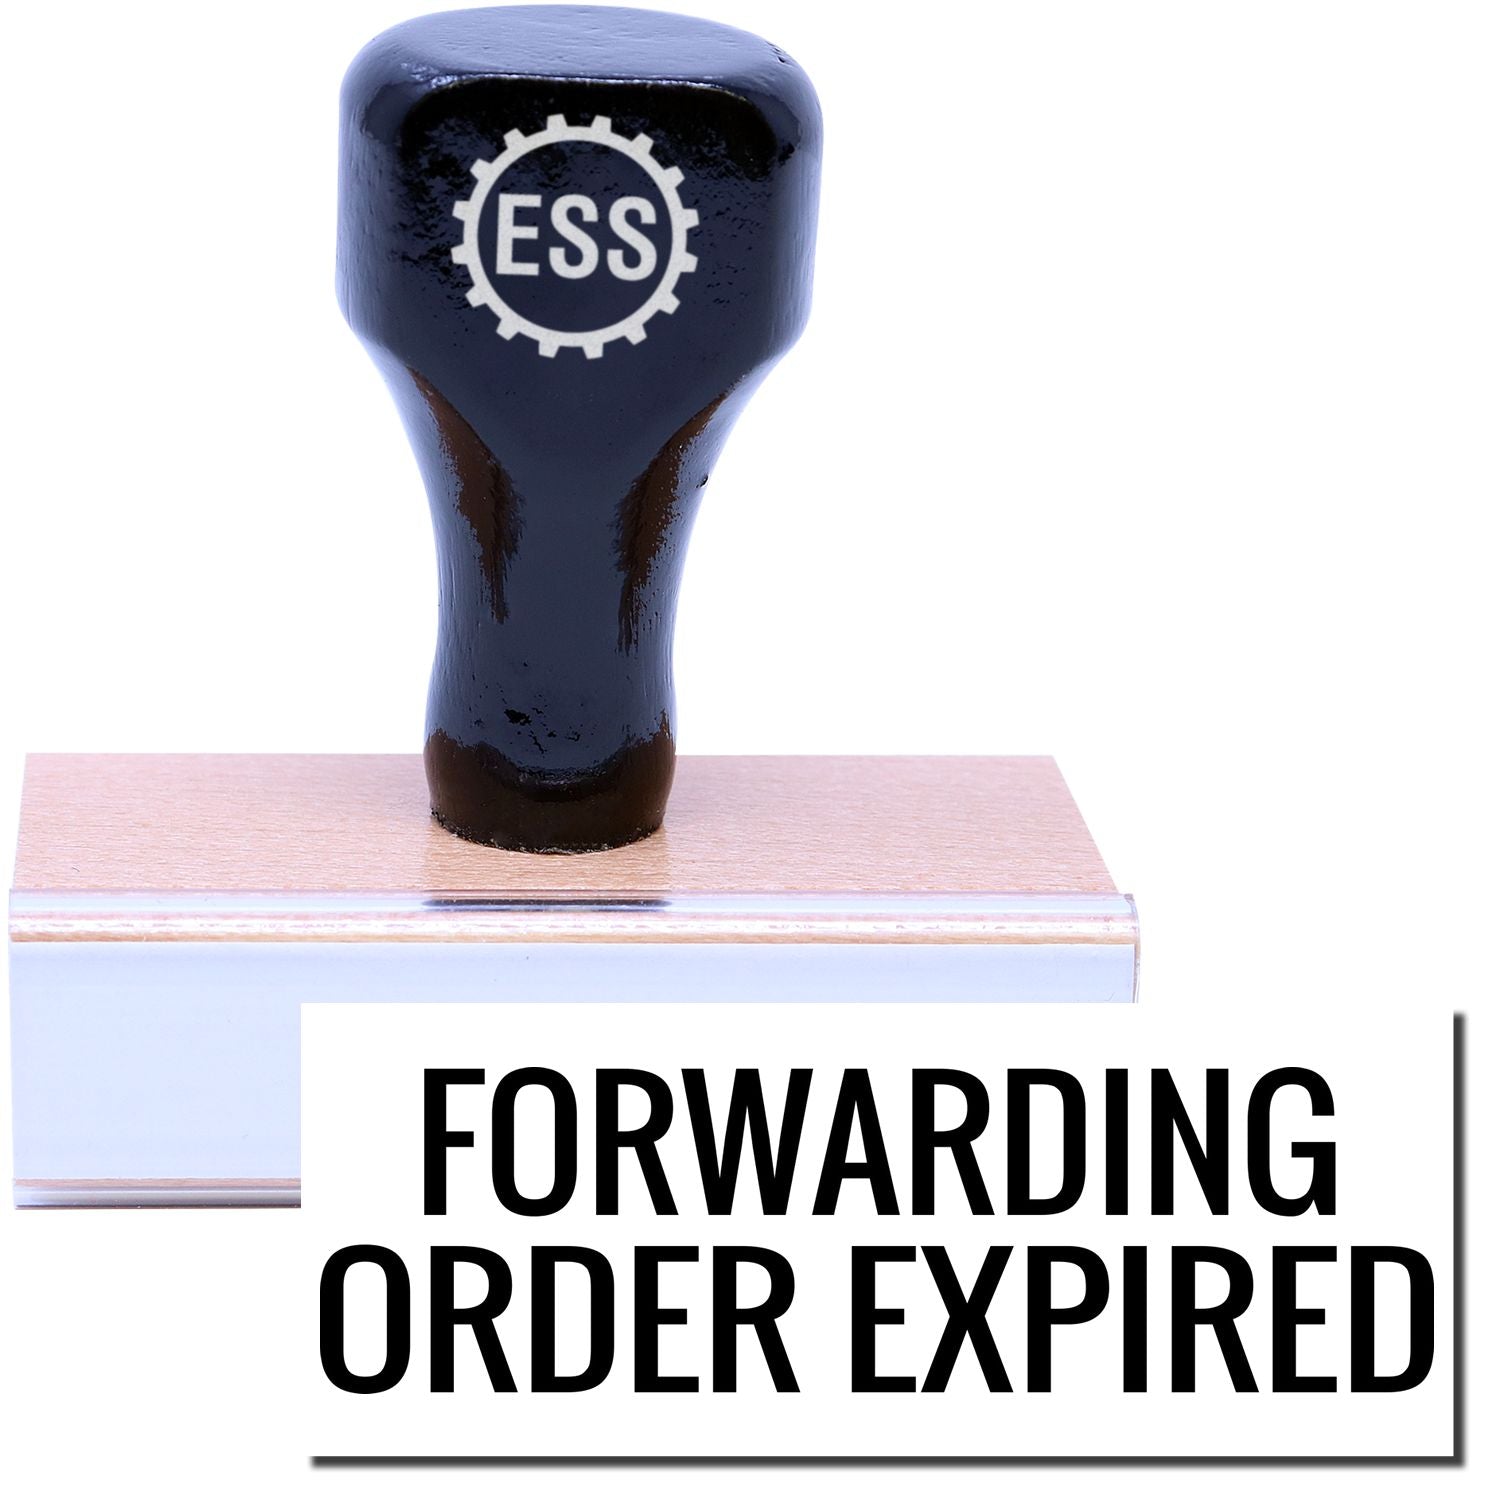 A stock office rubber stamp with a stamped image showing how the text "FORWARDING ORDER EXPIRED" in a large font is displayed after stamping.